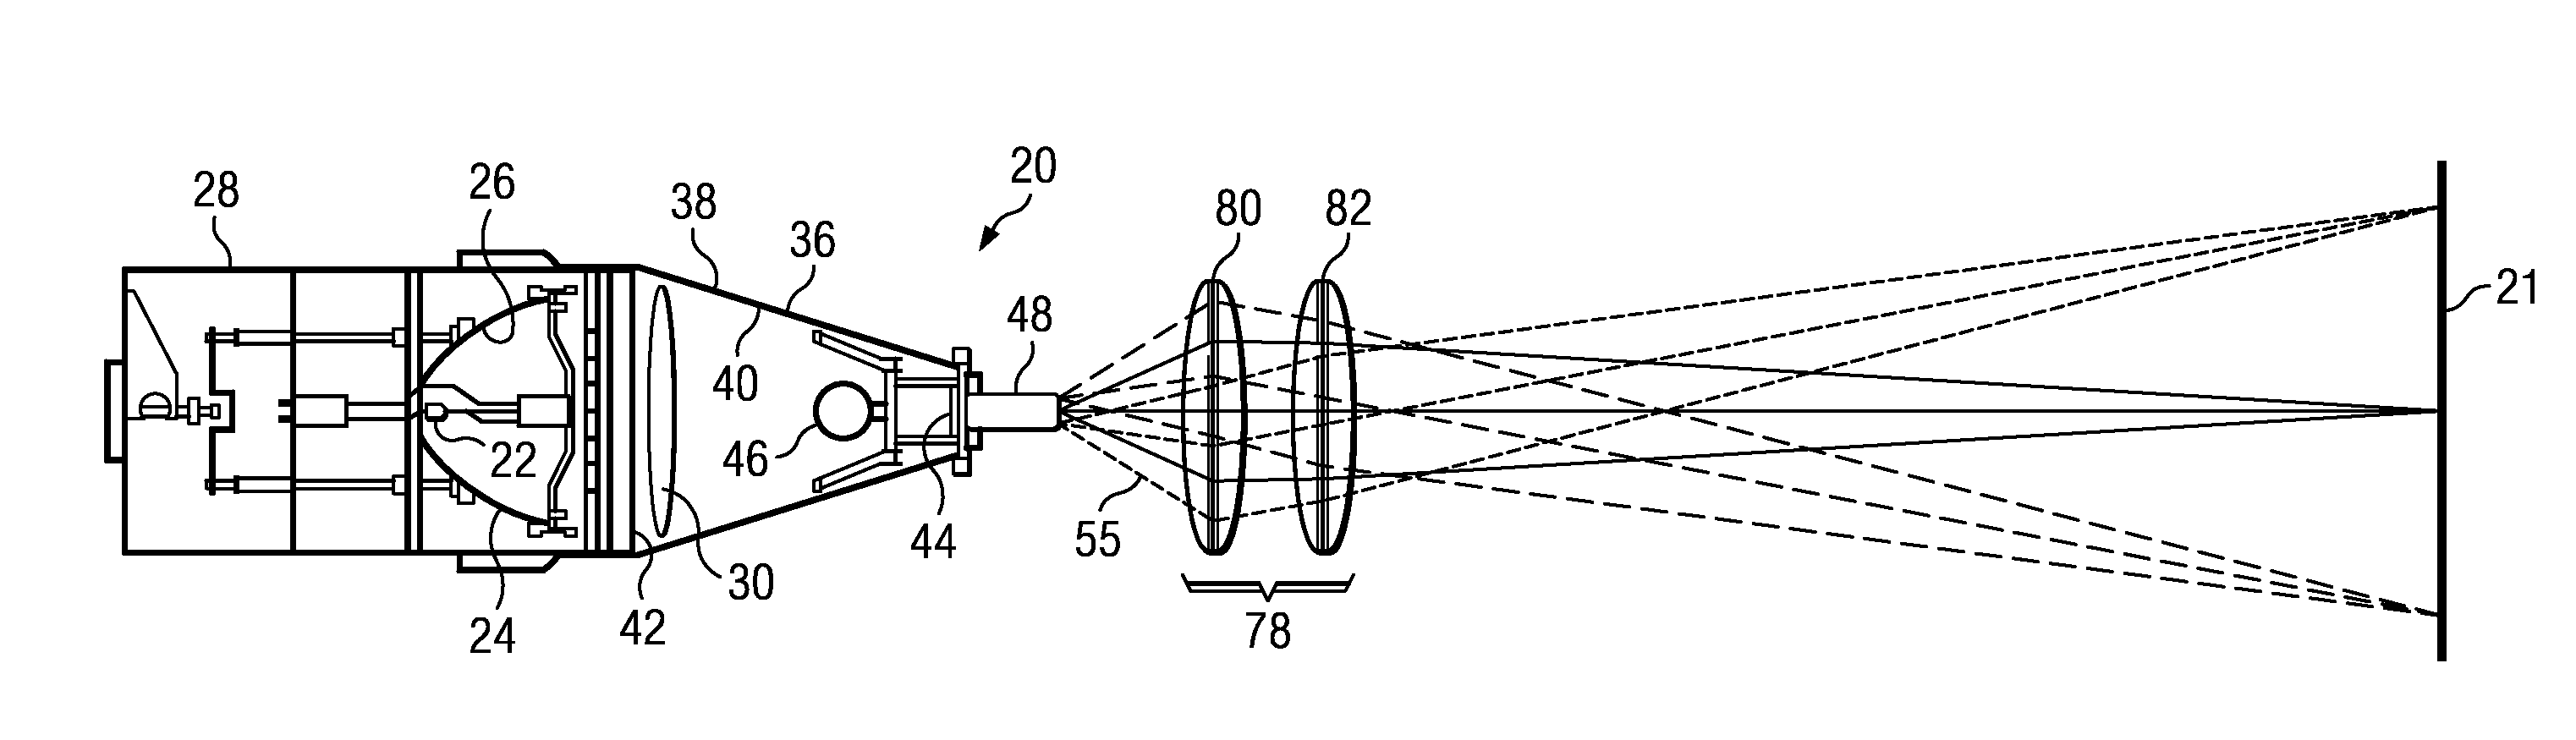 Optical Source Assembly Suitable for Use as a Solar Simulator and Associated Methods